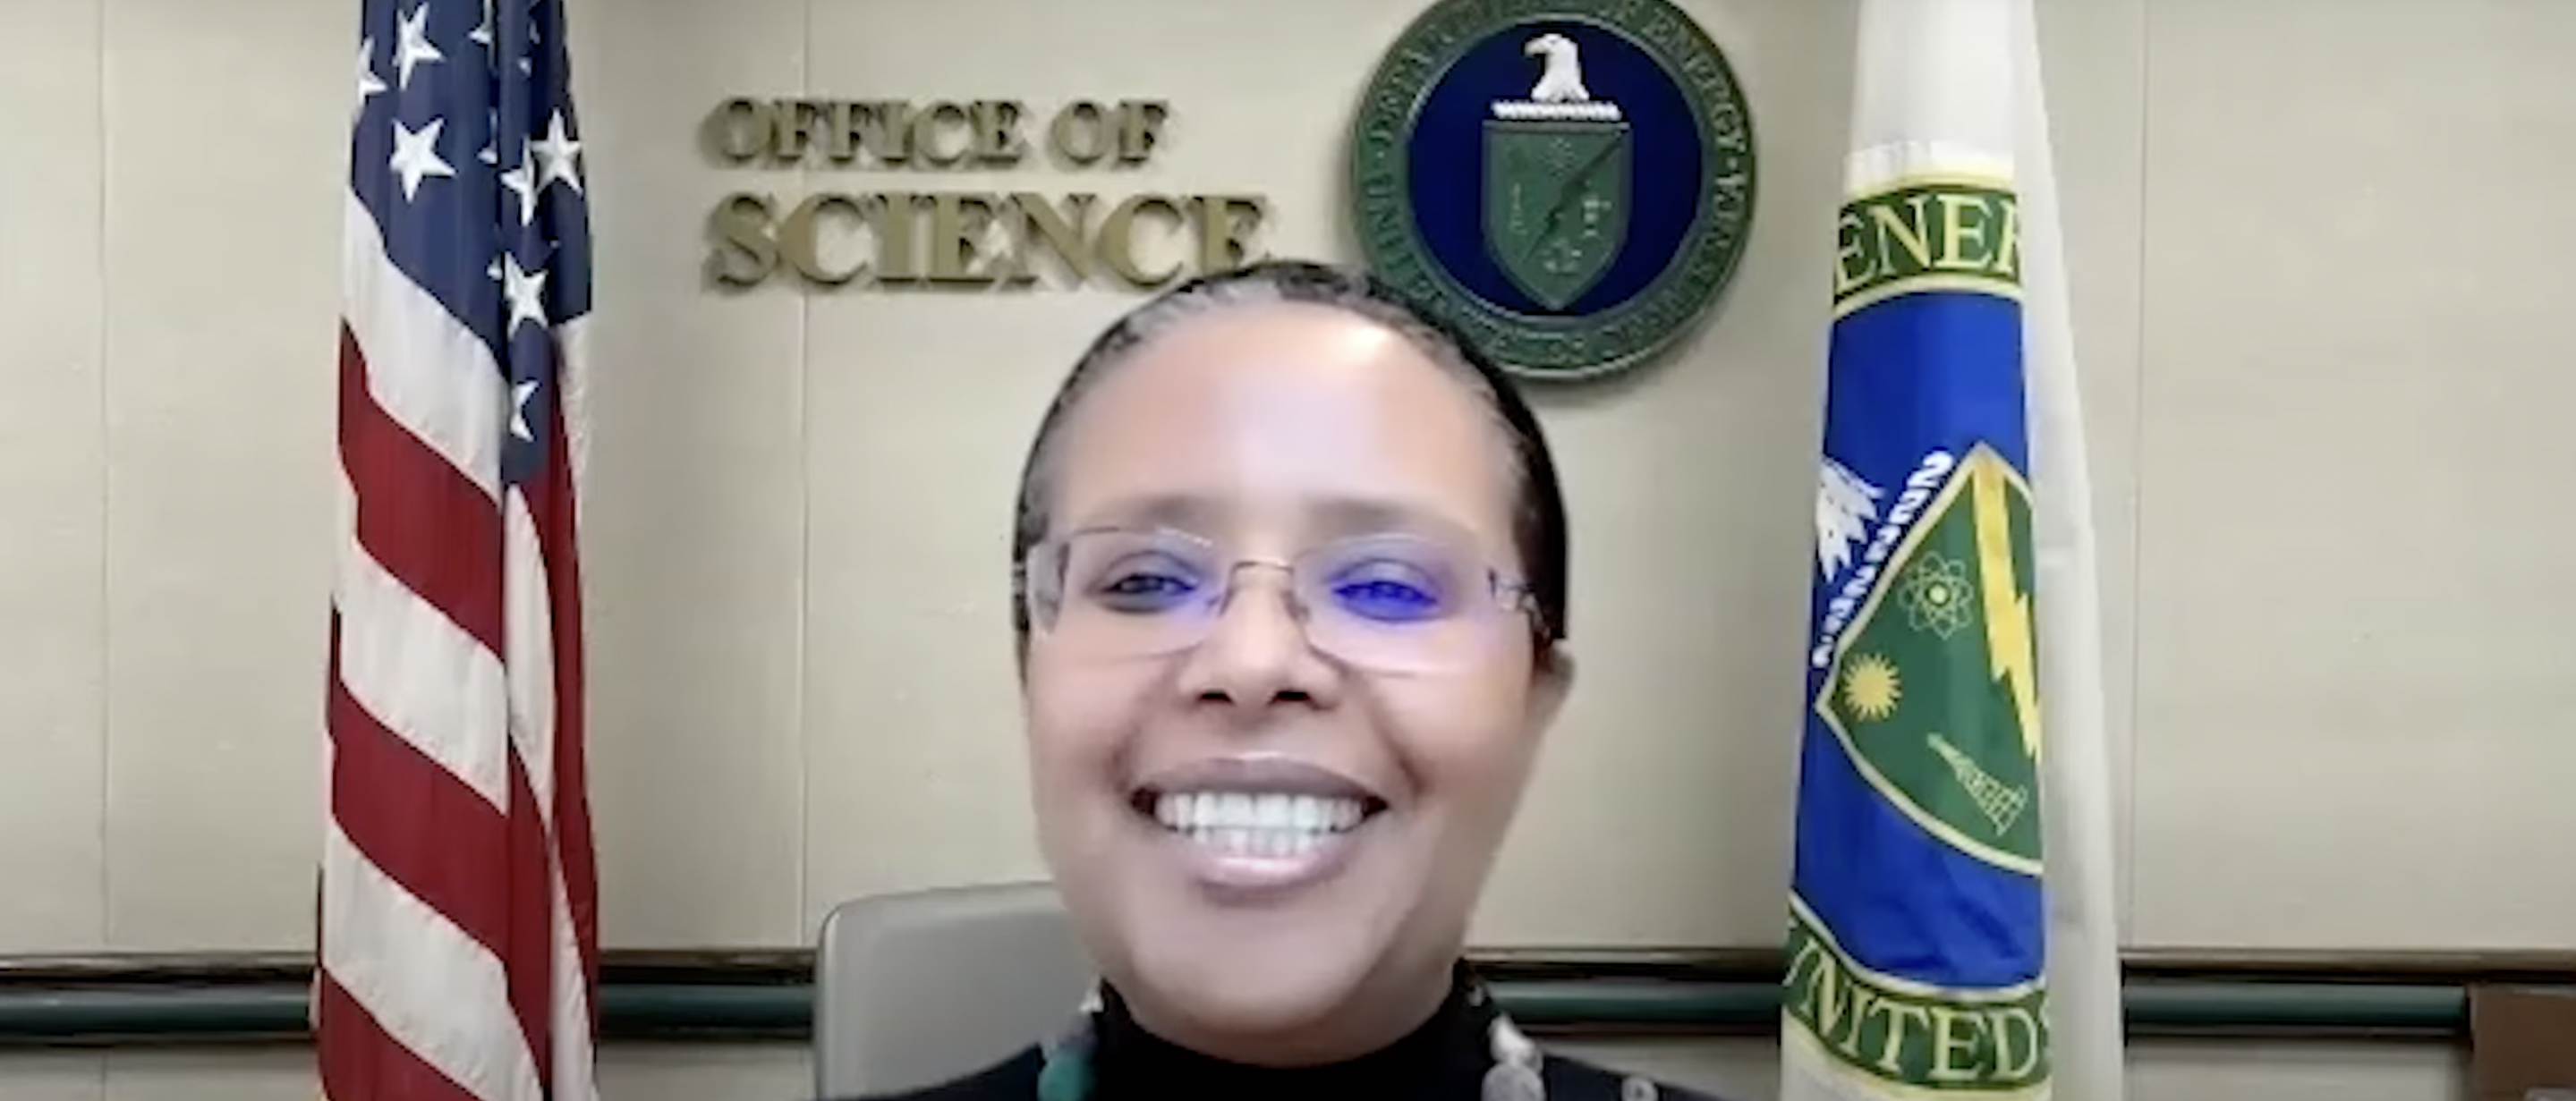 Outgoing Biden Science Advisor Leaves Legacy Of Forcing Diversity, Equity And Inclusion Down Everyone’s Throats